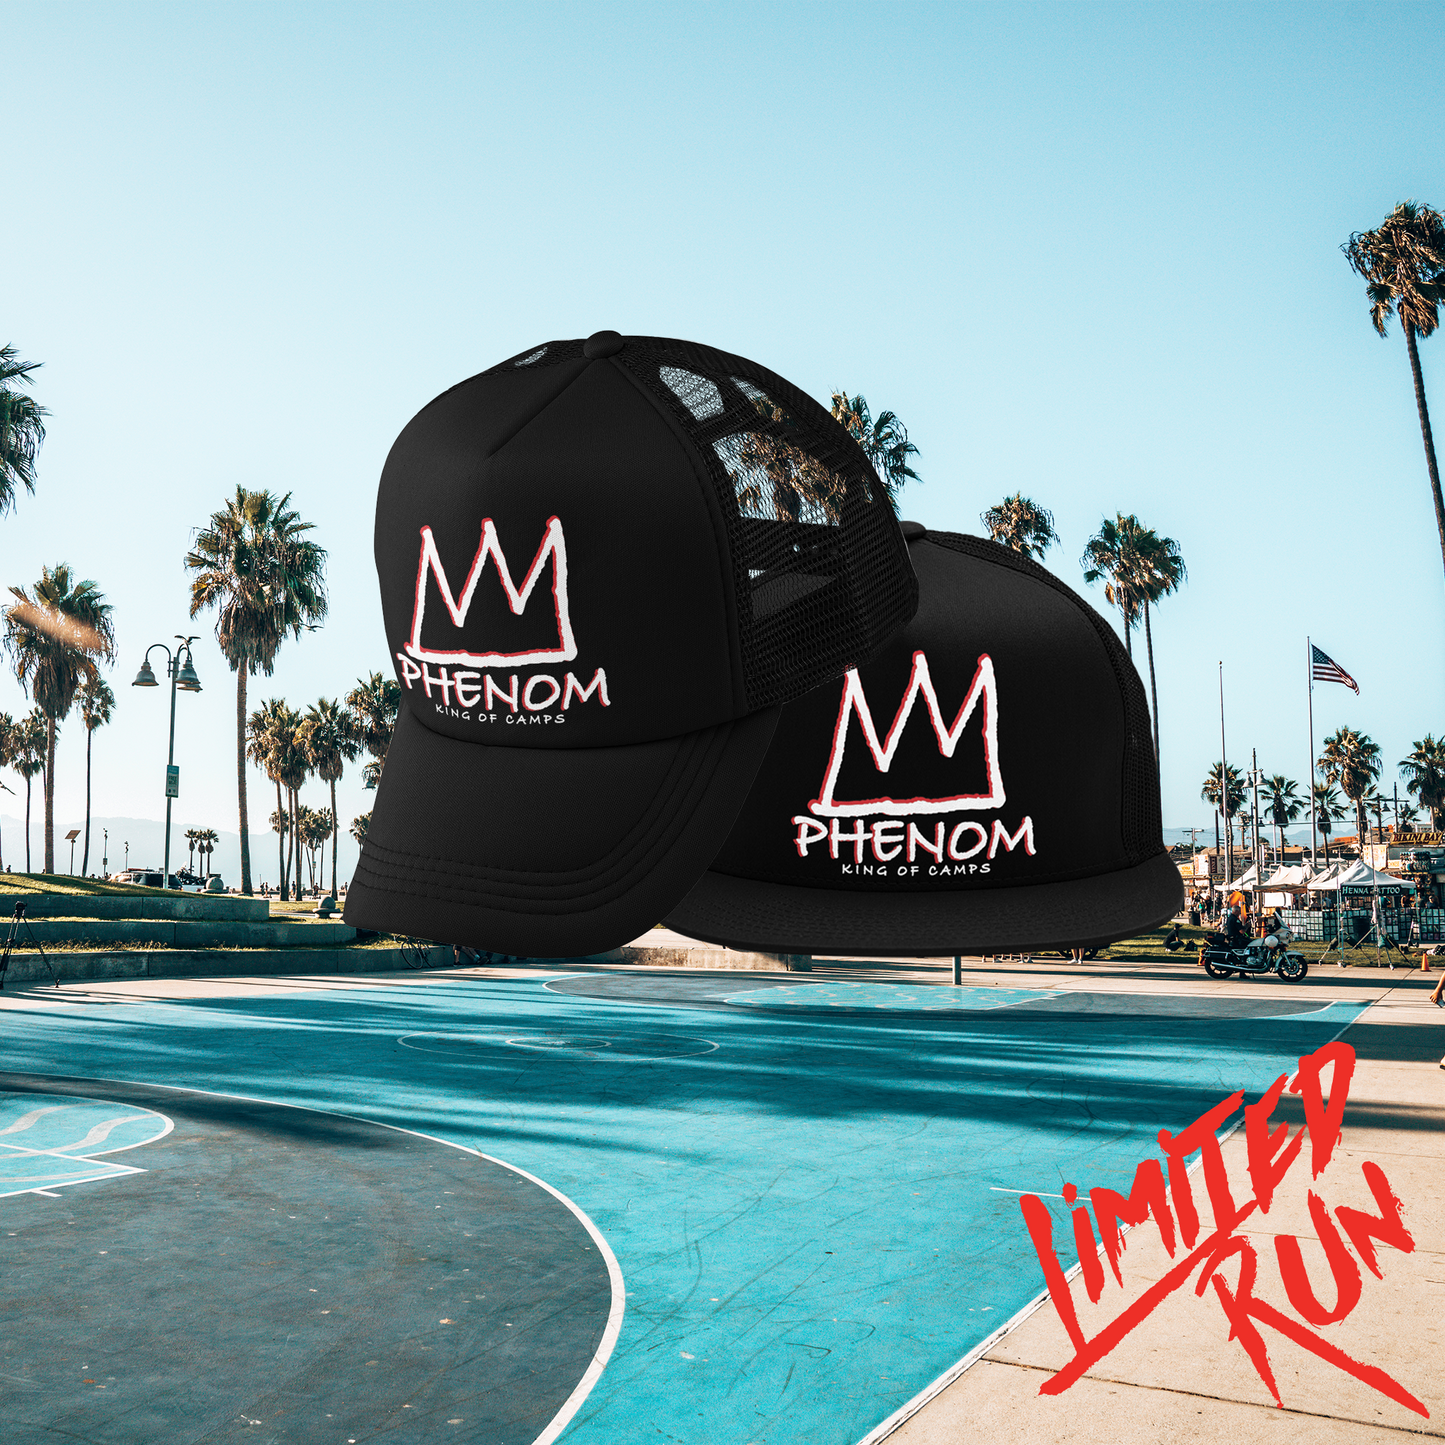 Phenom "King Of Camps" Snap Back